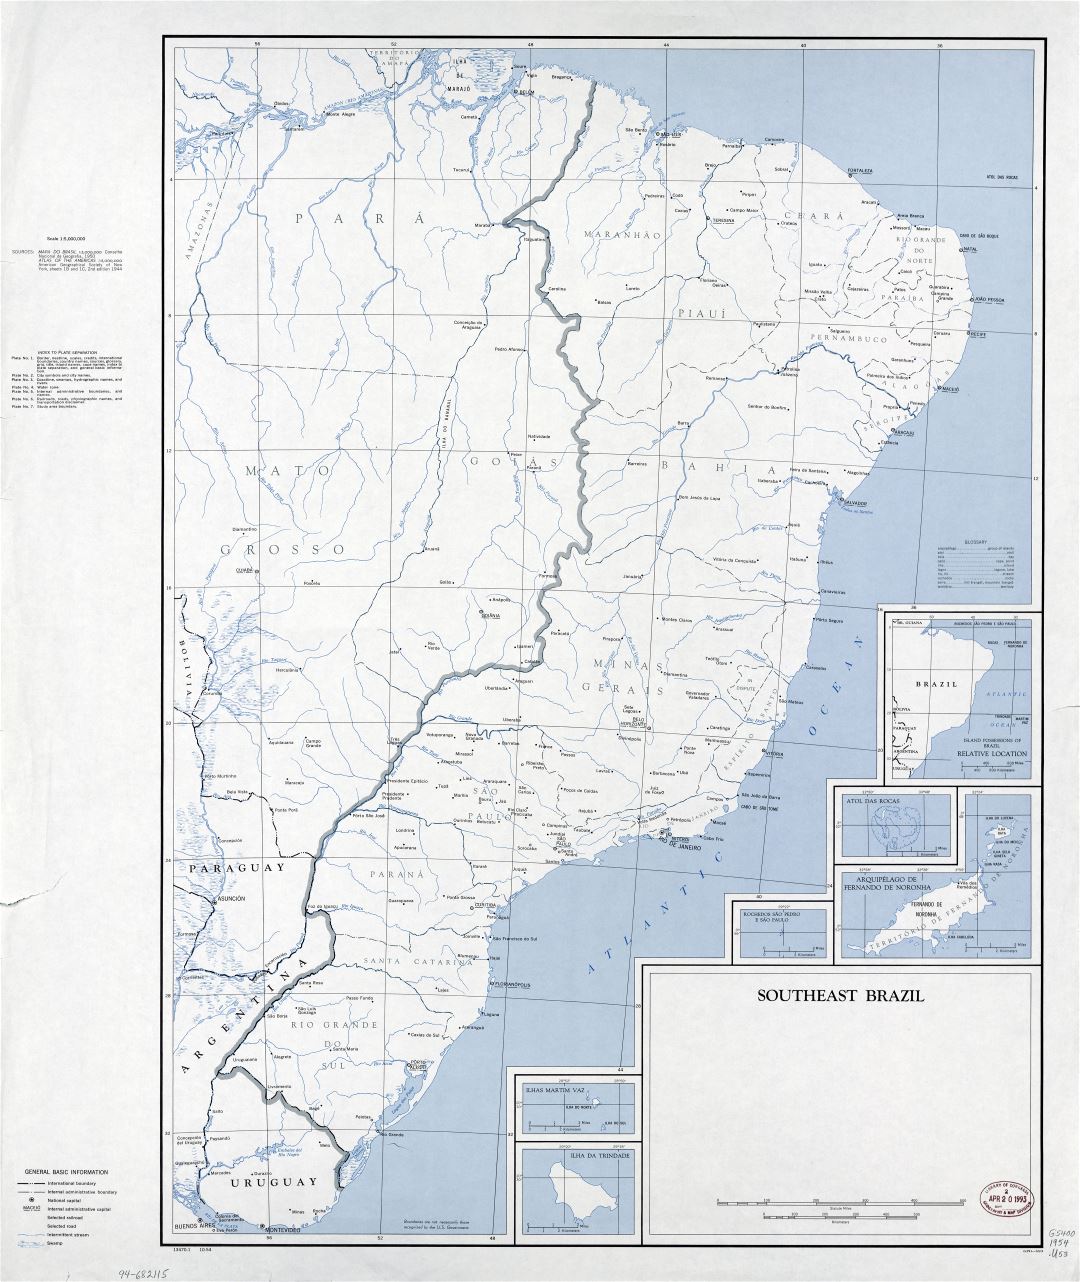 Large scale map of Southeast Brazil with other marks - 1954